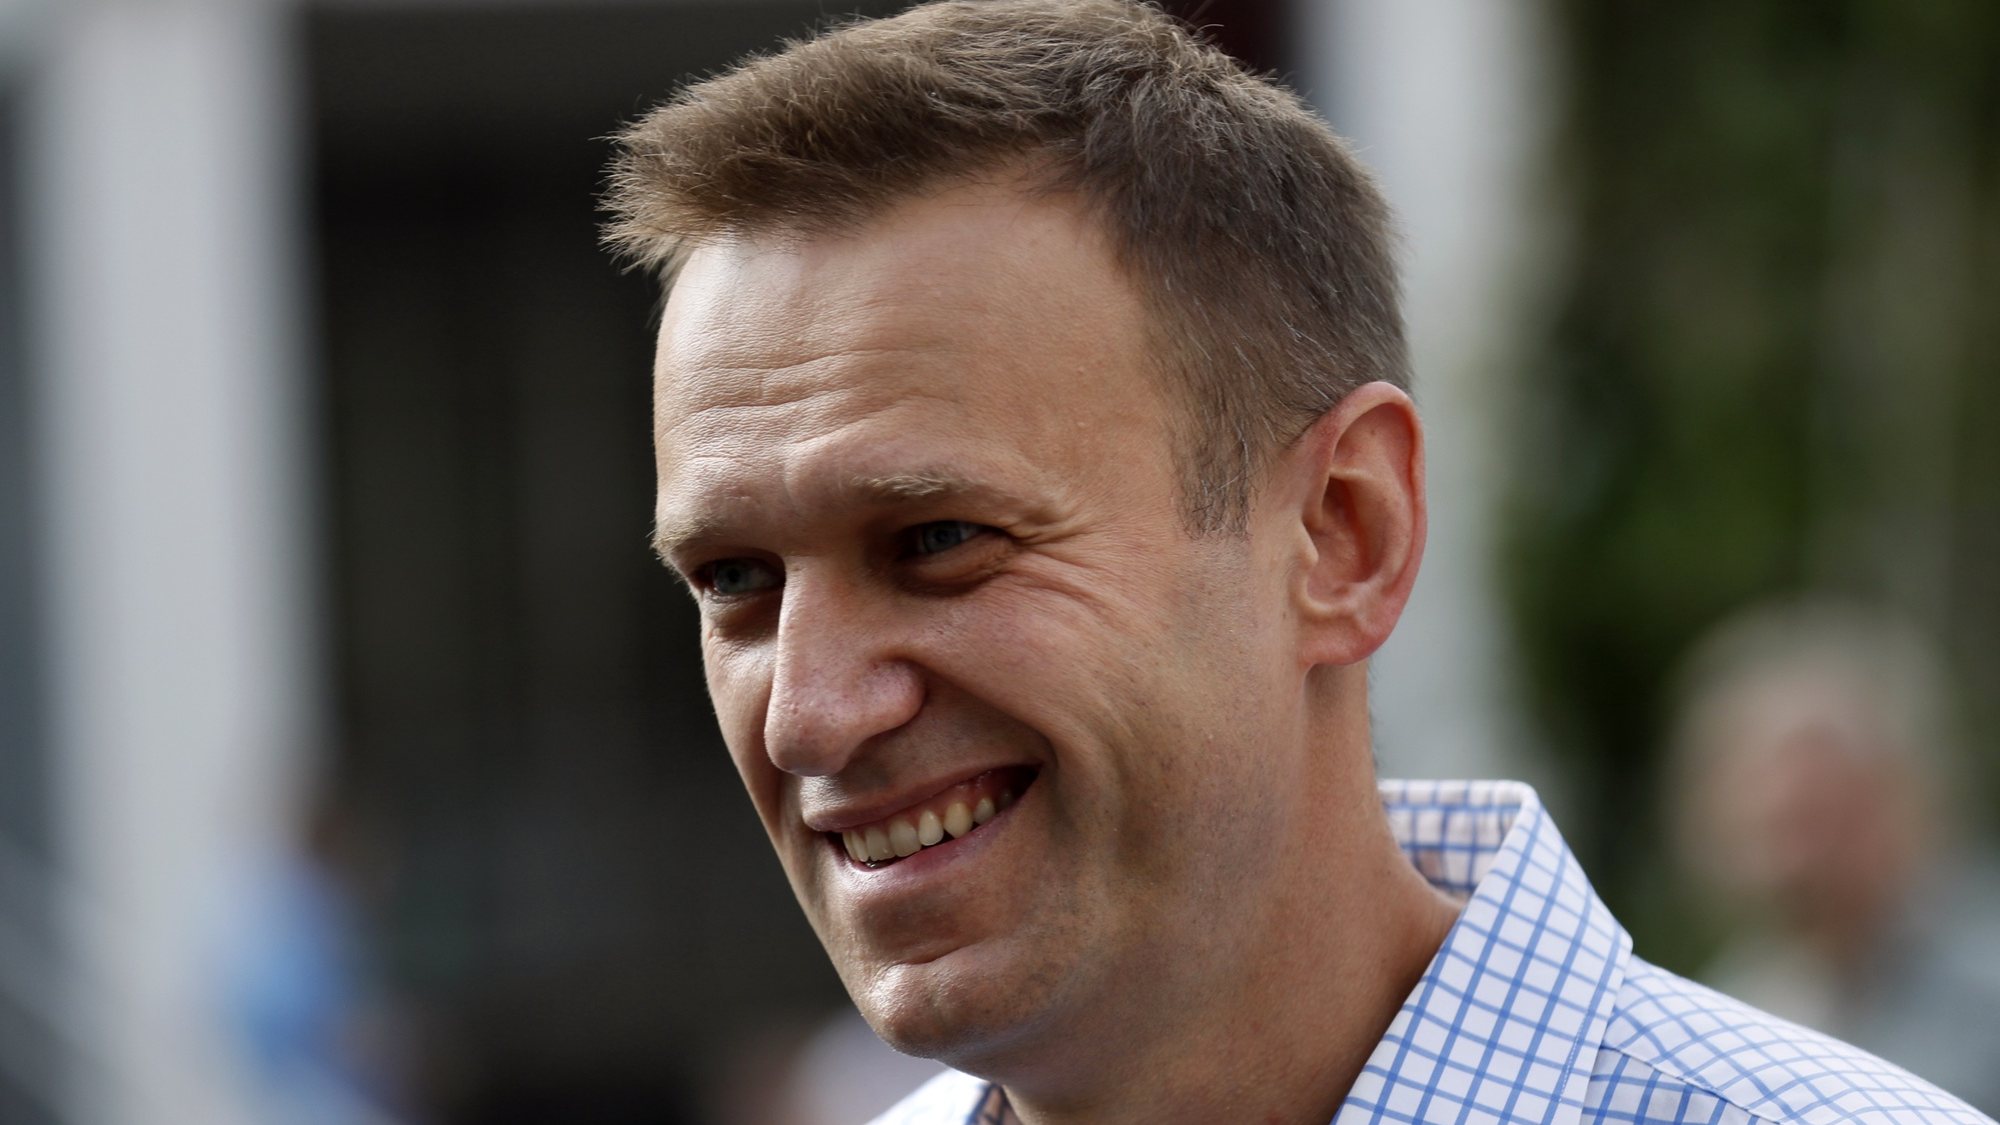 epa08934350 (FILE) - Russian opposition candidate Alexei Navalny reacts after voting in the Moscow City Duma elections in Moscow, Russia, 08 September 2019 (reissued 13 January 2021). Navalny on 13 January 2021 stated on his Twitter account that he plans to travel to Moscow on Sunday, 17 January 2021.  EPA/YURI KOCHETKOV *** Local Caption *** 55452013